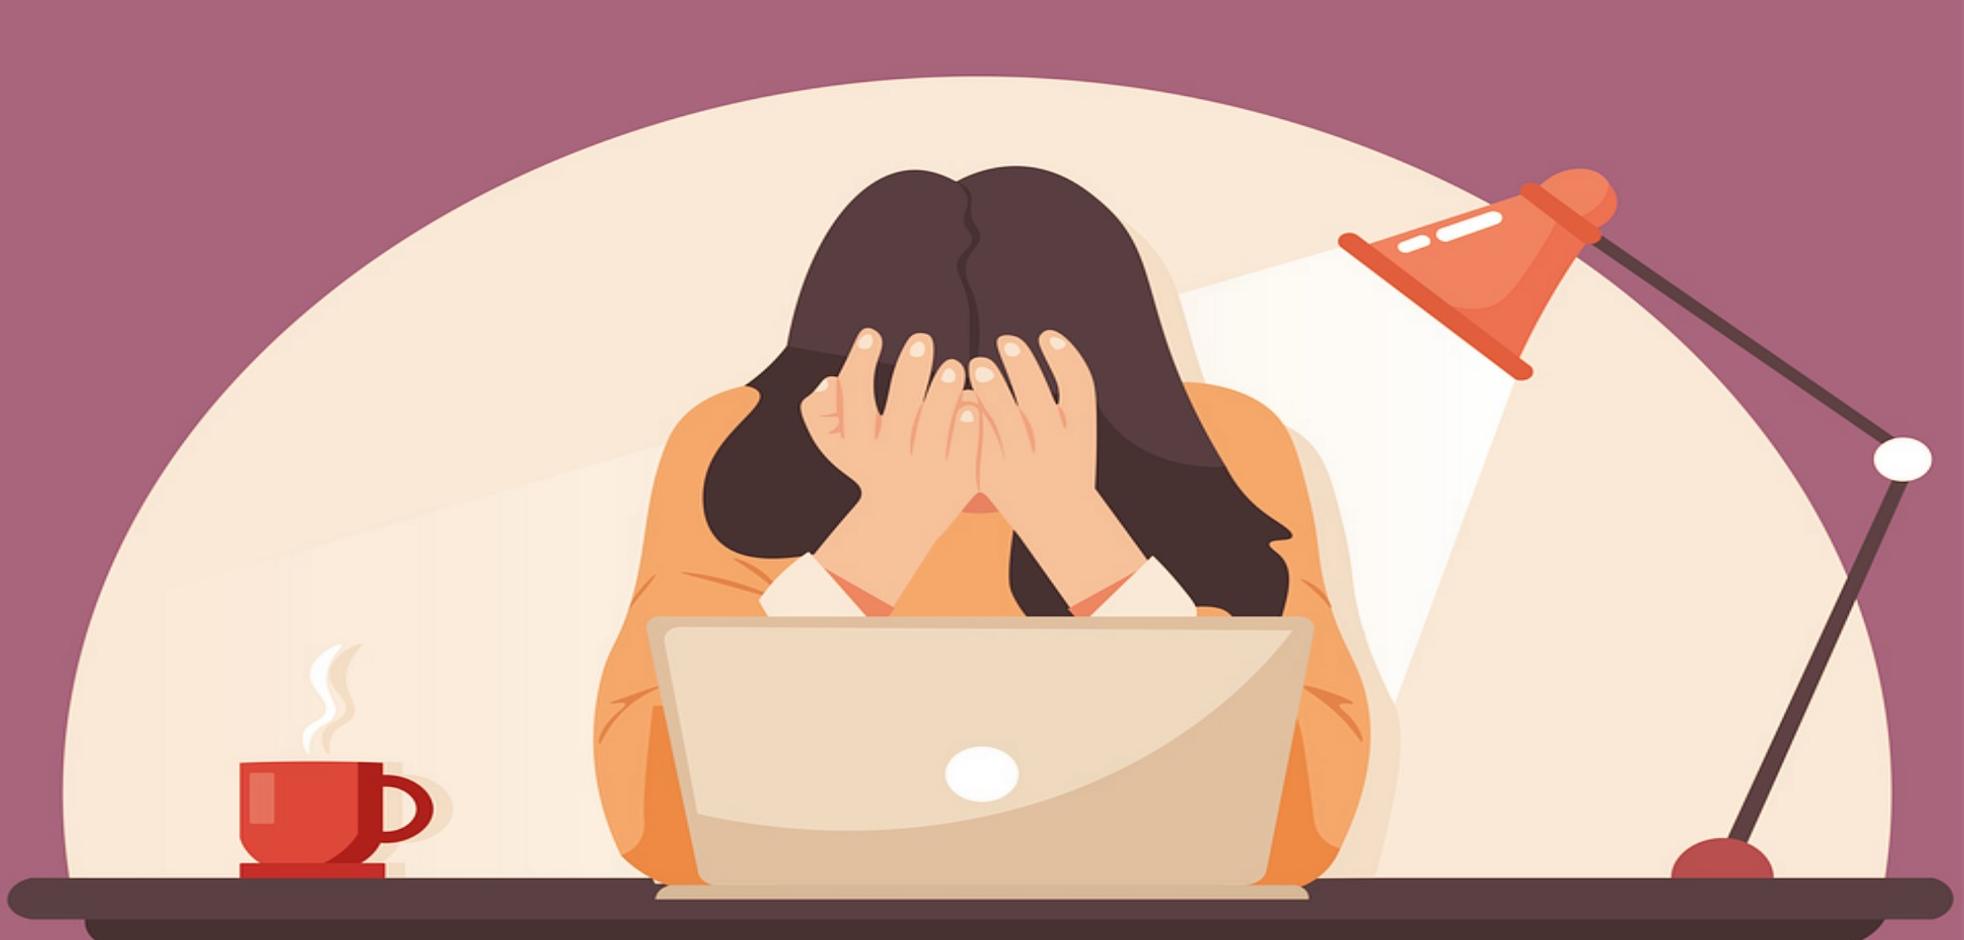 Illustration of a female with her hands on her face in distress at her desk with an open laptop computer.